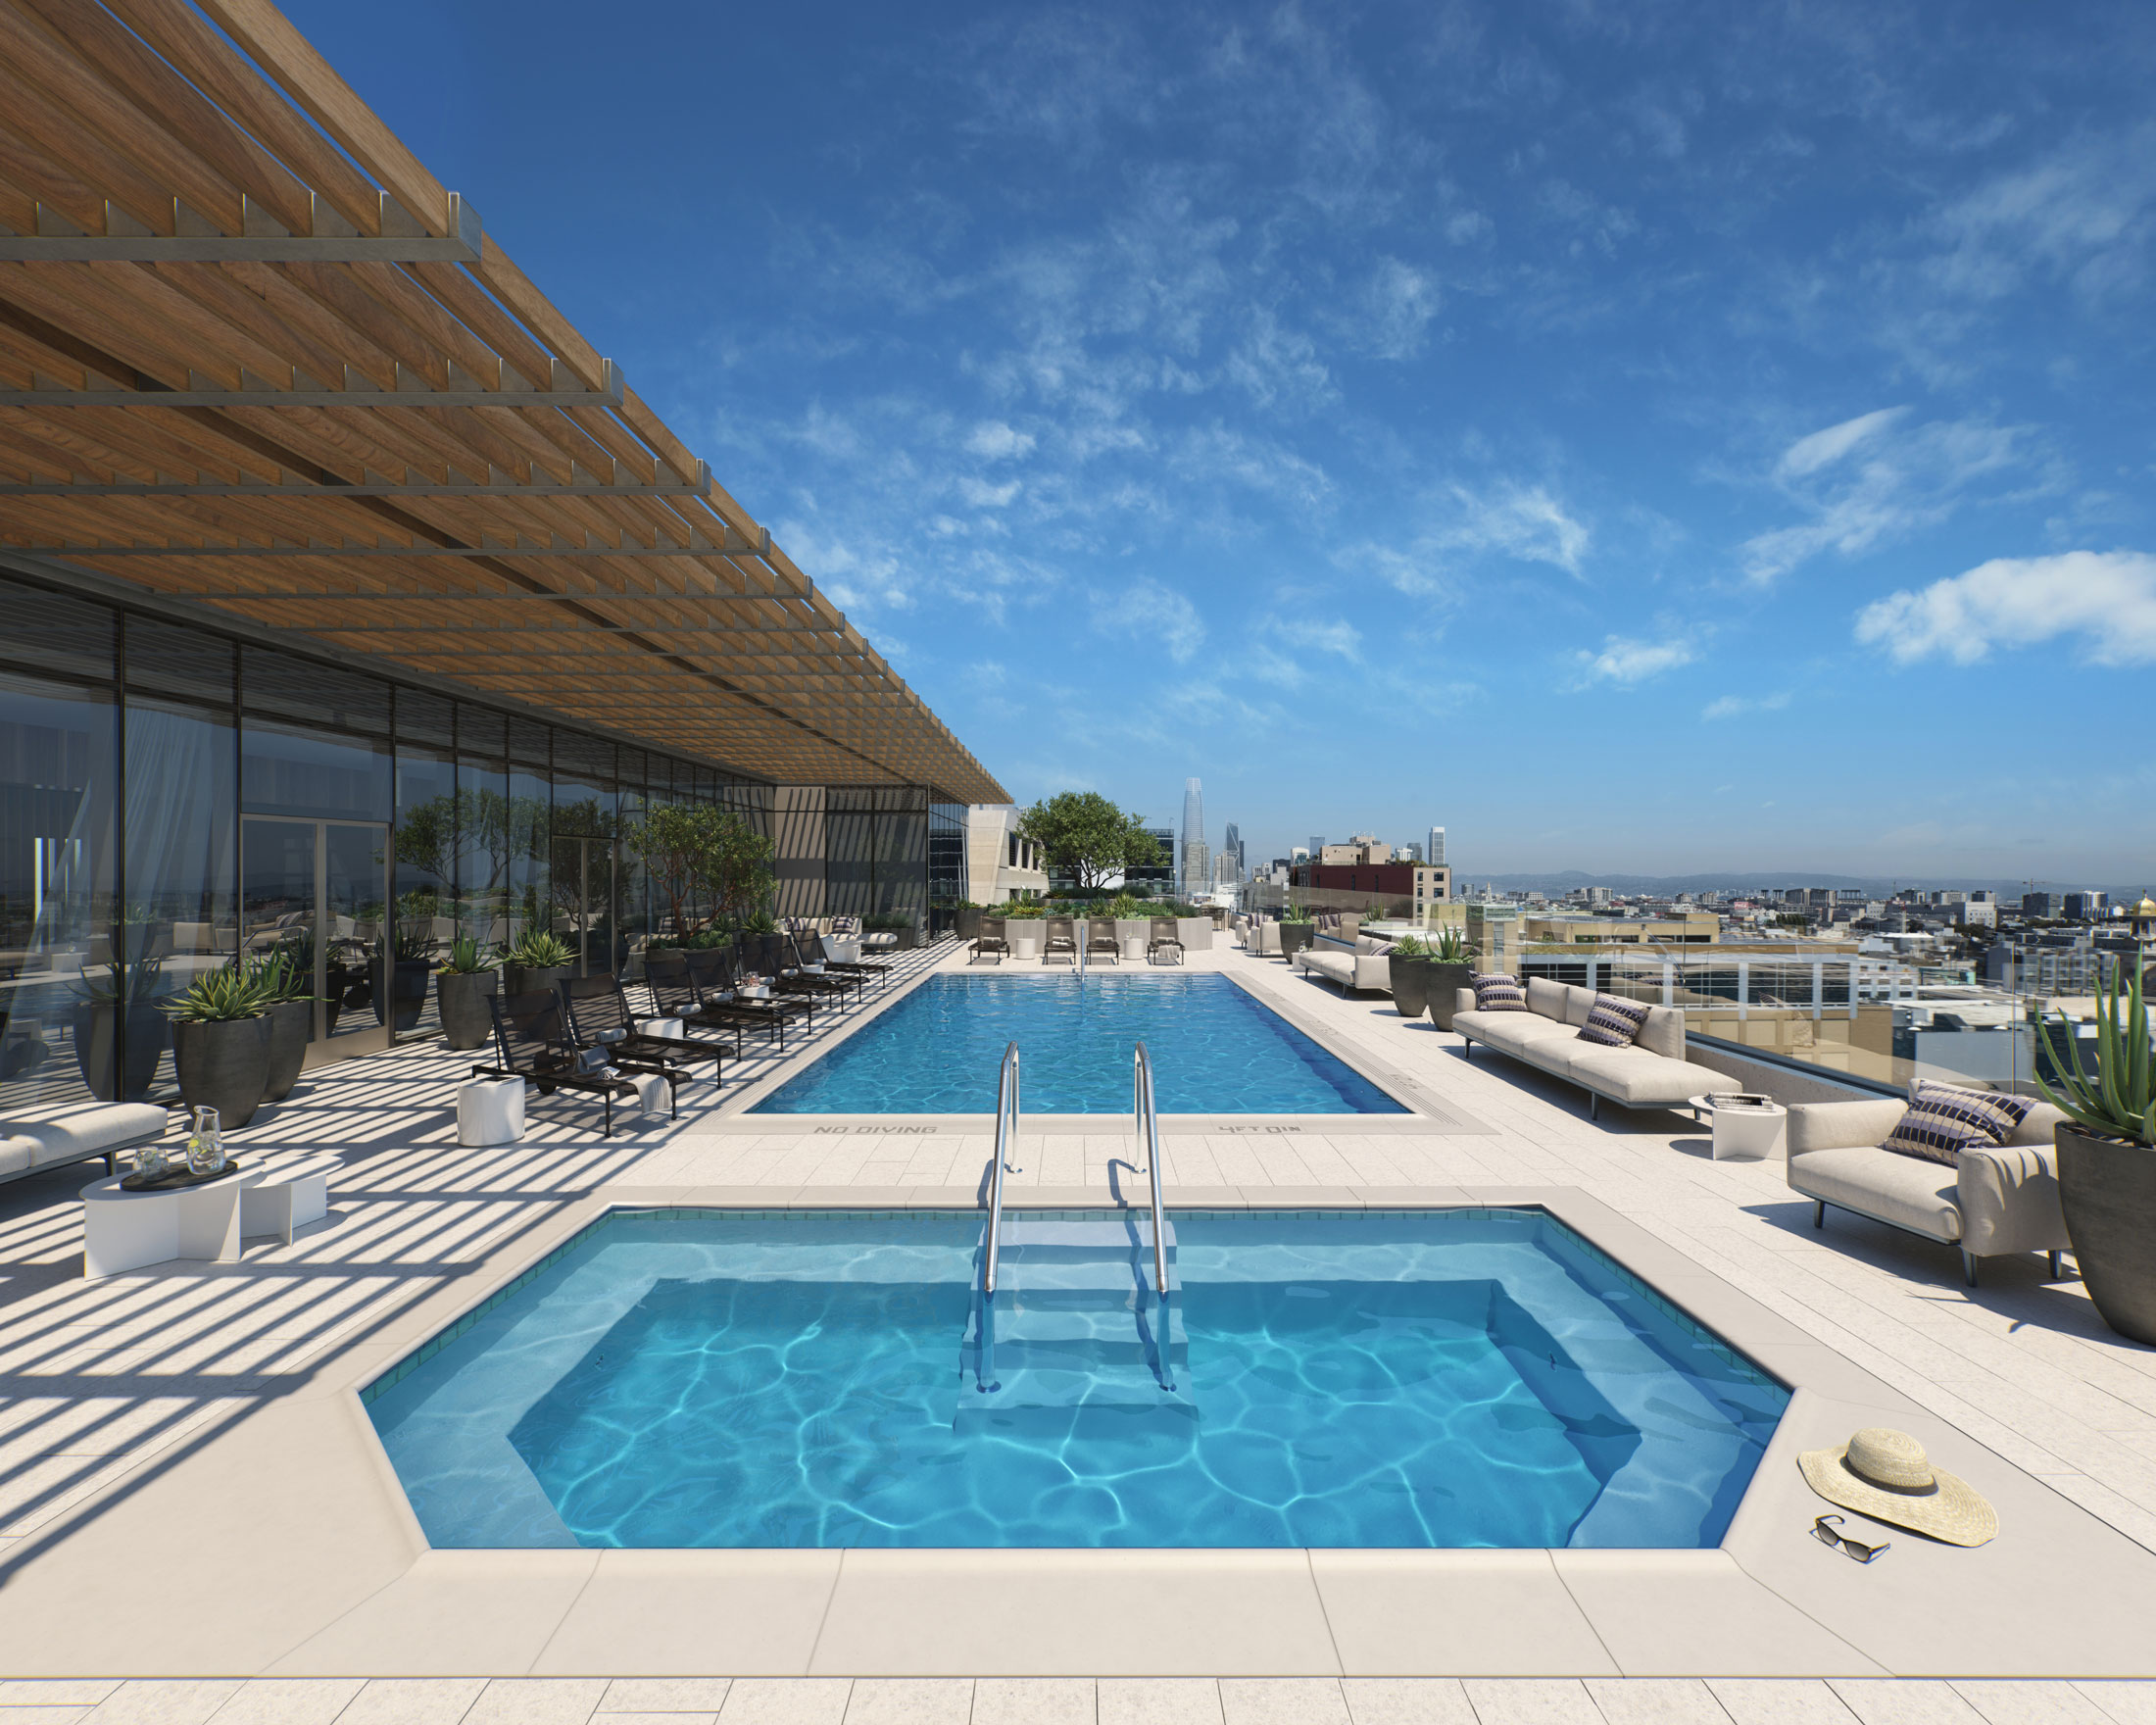 Architectural Rendering of the pool of the Fifteen Fifty project located in San Francisco, California